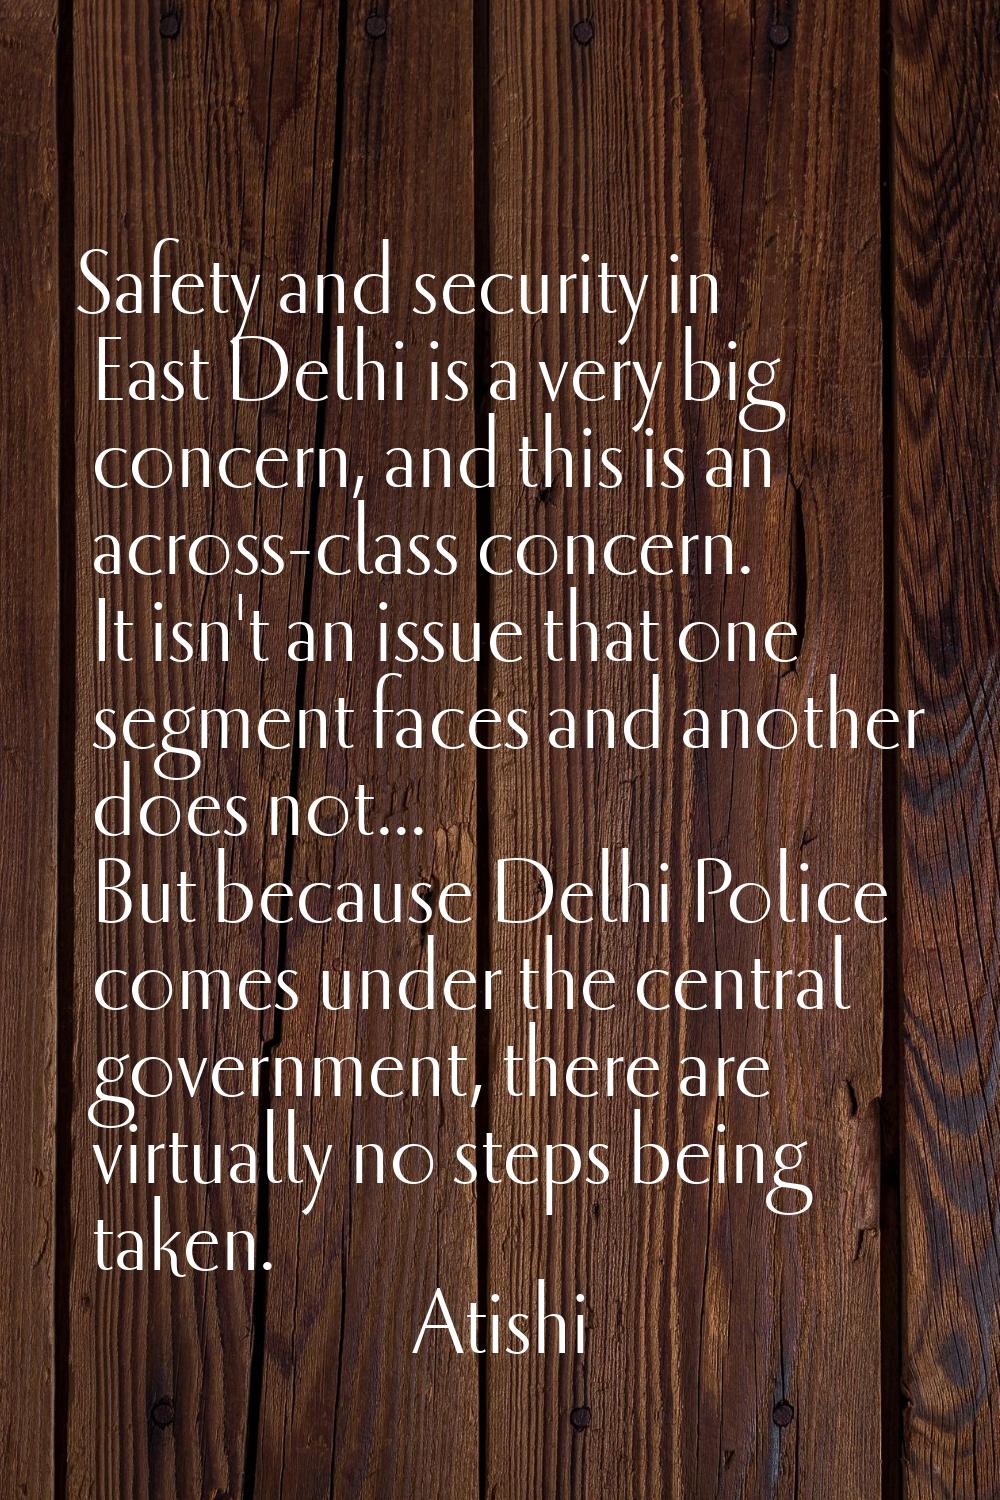 Safety and security in East Delhi is a very big concern, and this is an across-class concern. It is